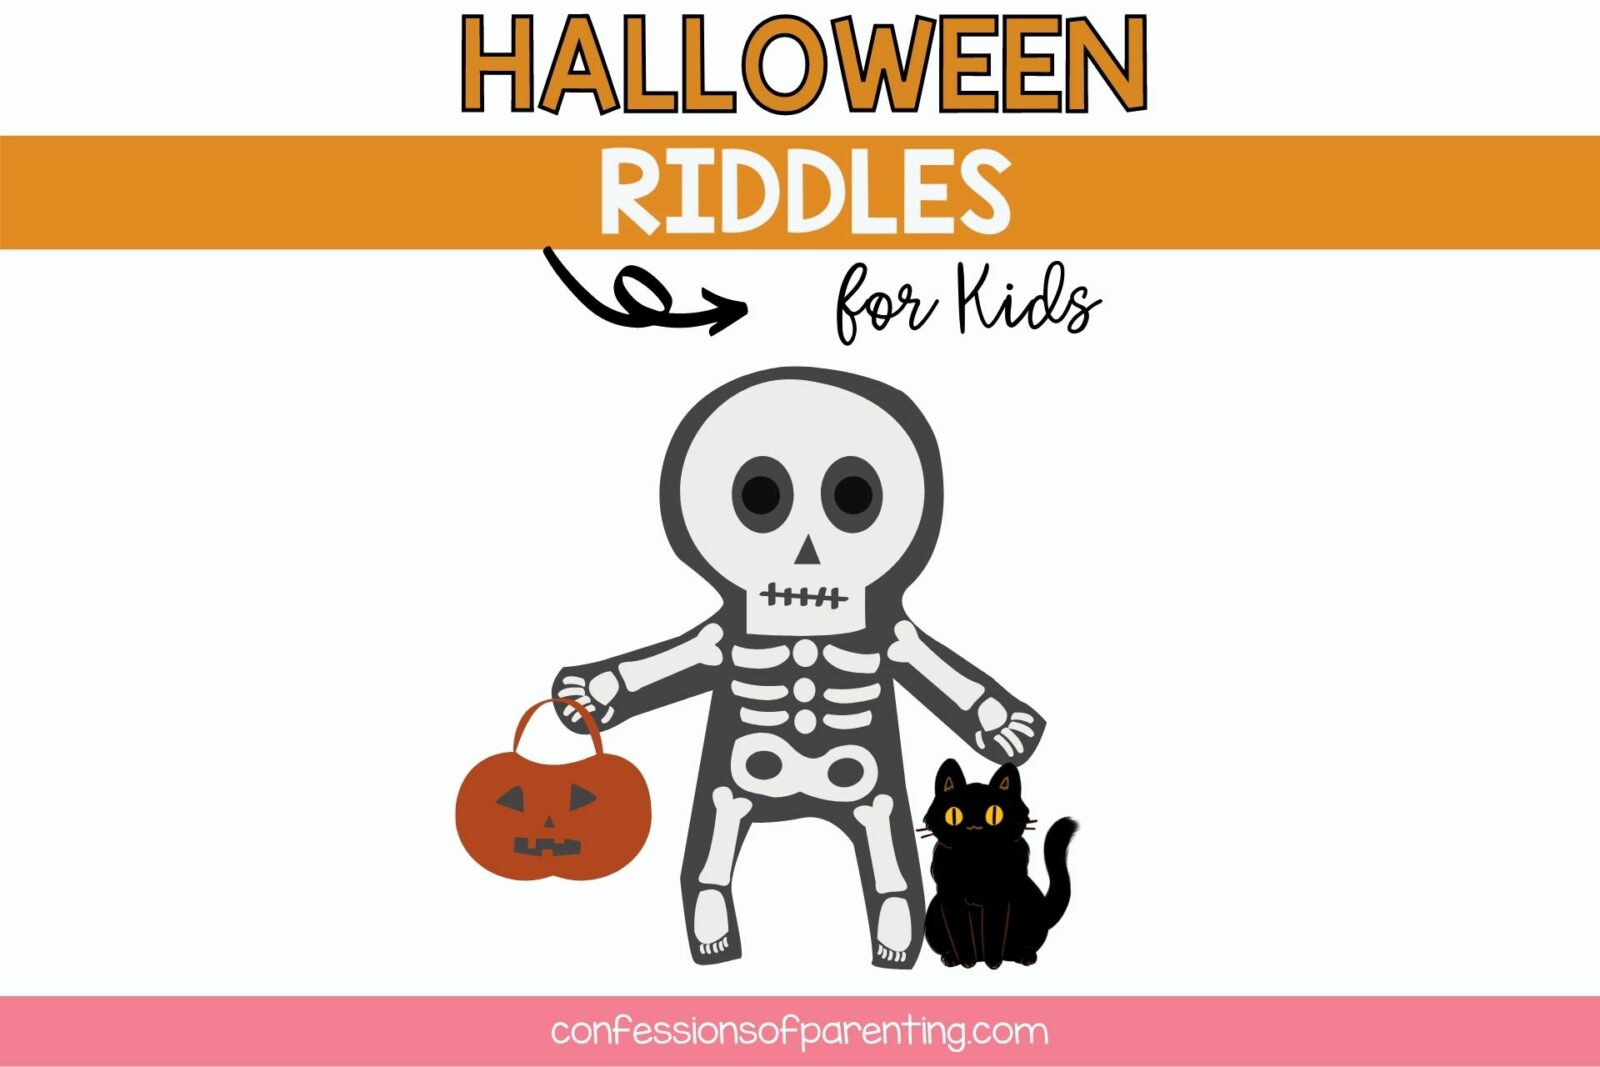 115 Perfectly Spooky Halloween Riddles for Kids